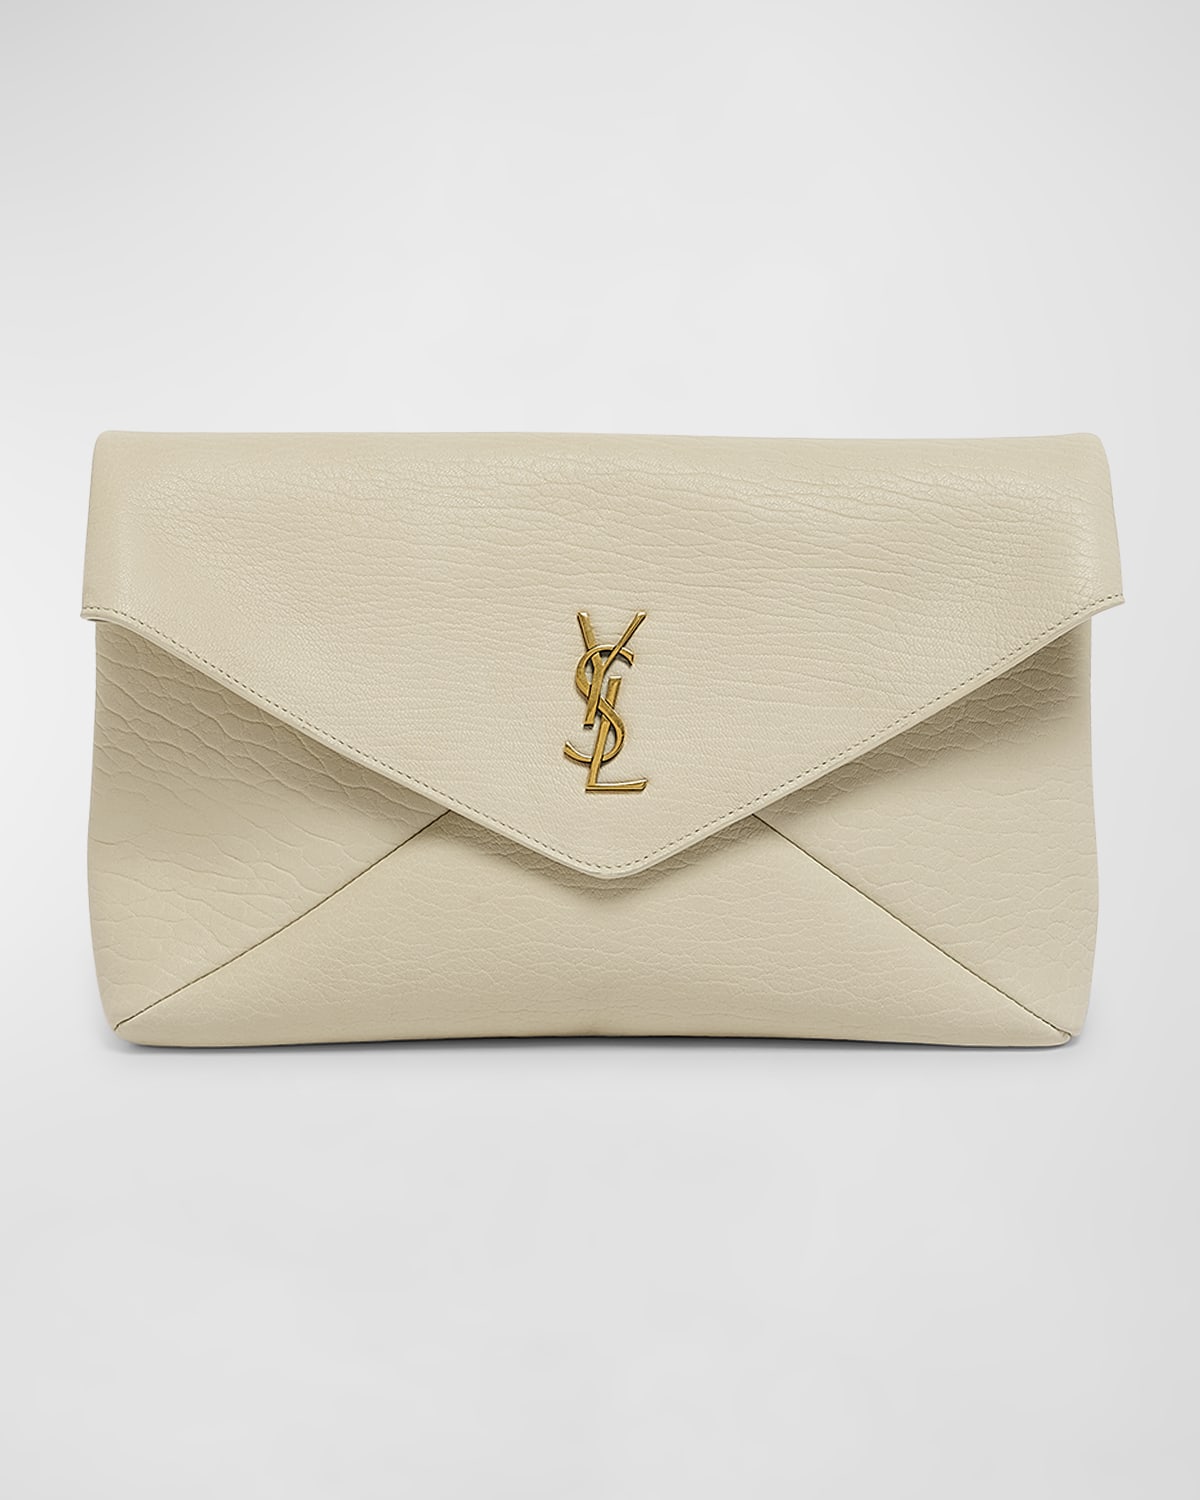 Saint Laurent Kate YSL Clutch Bag in Spazzolato Leather | Neiman 